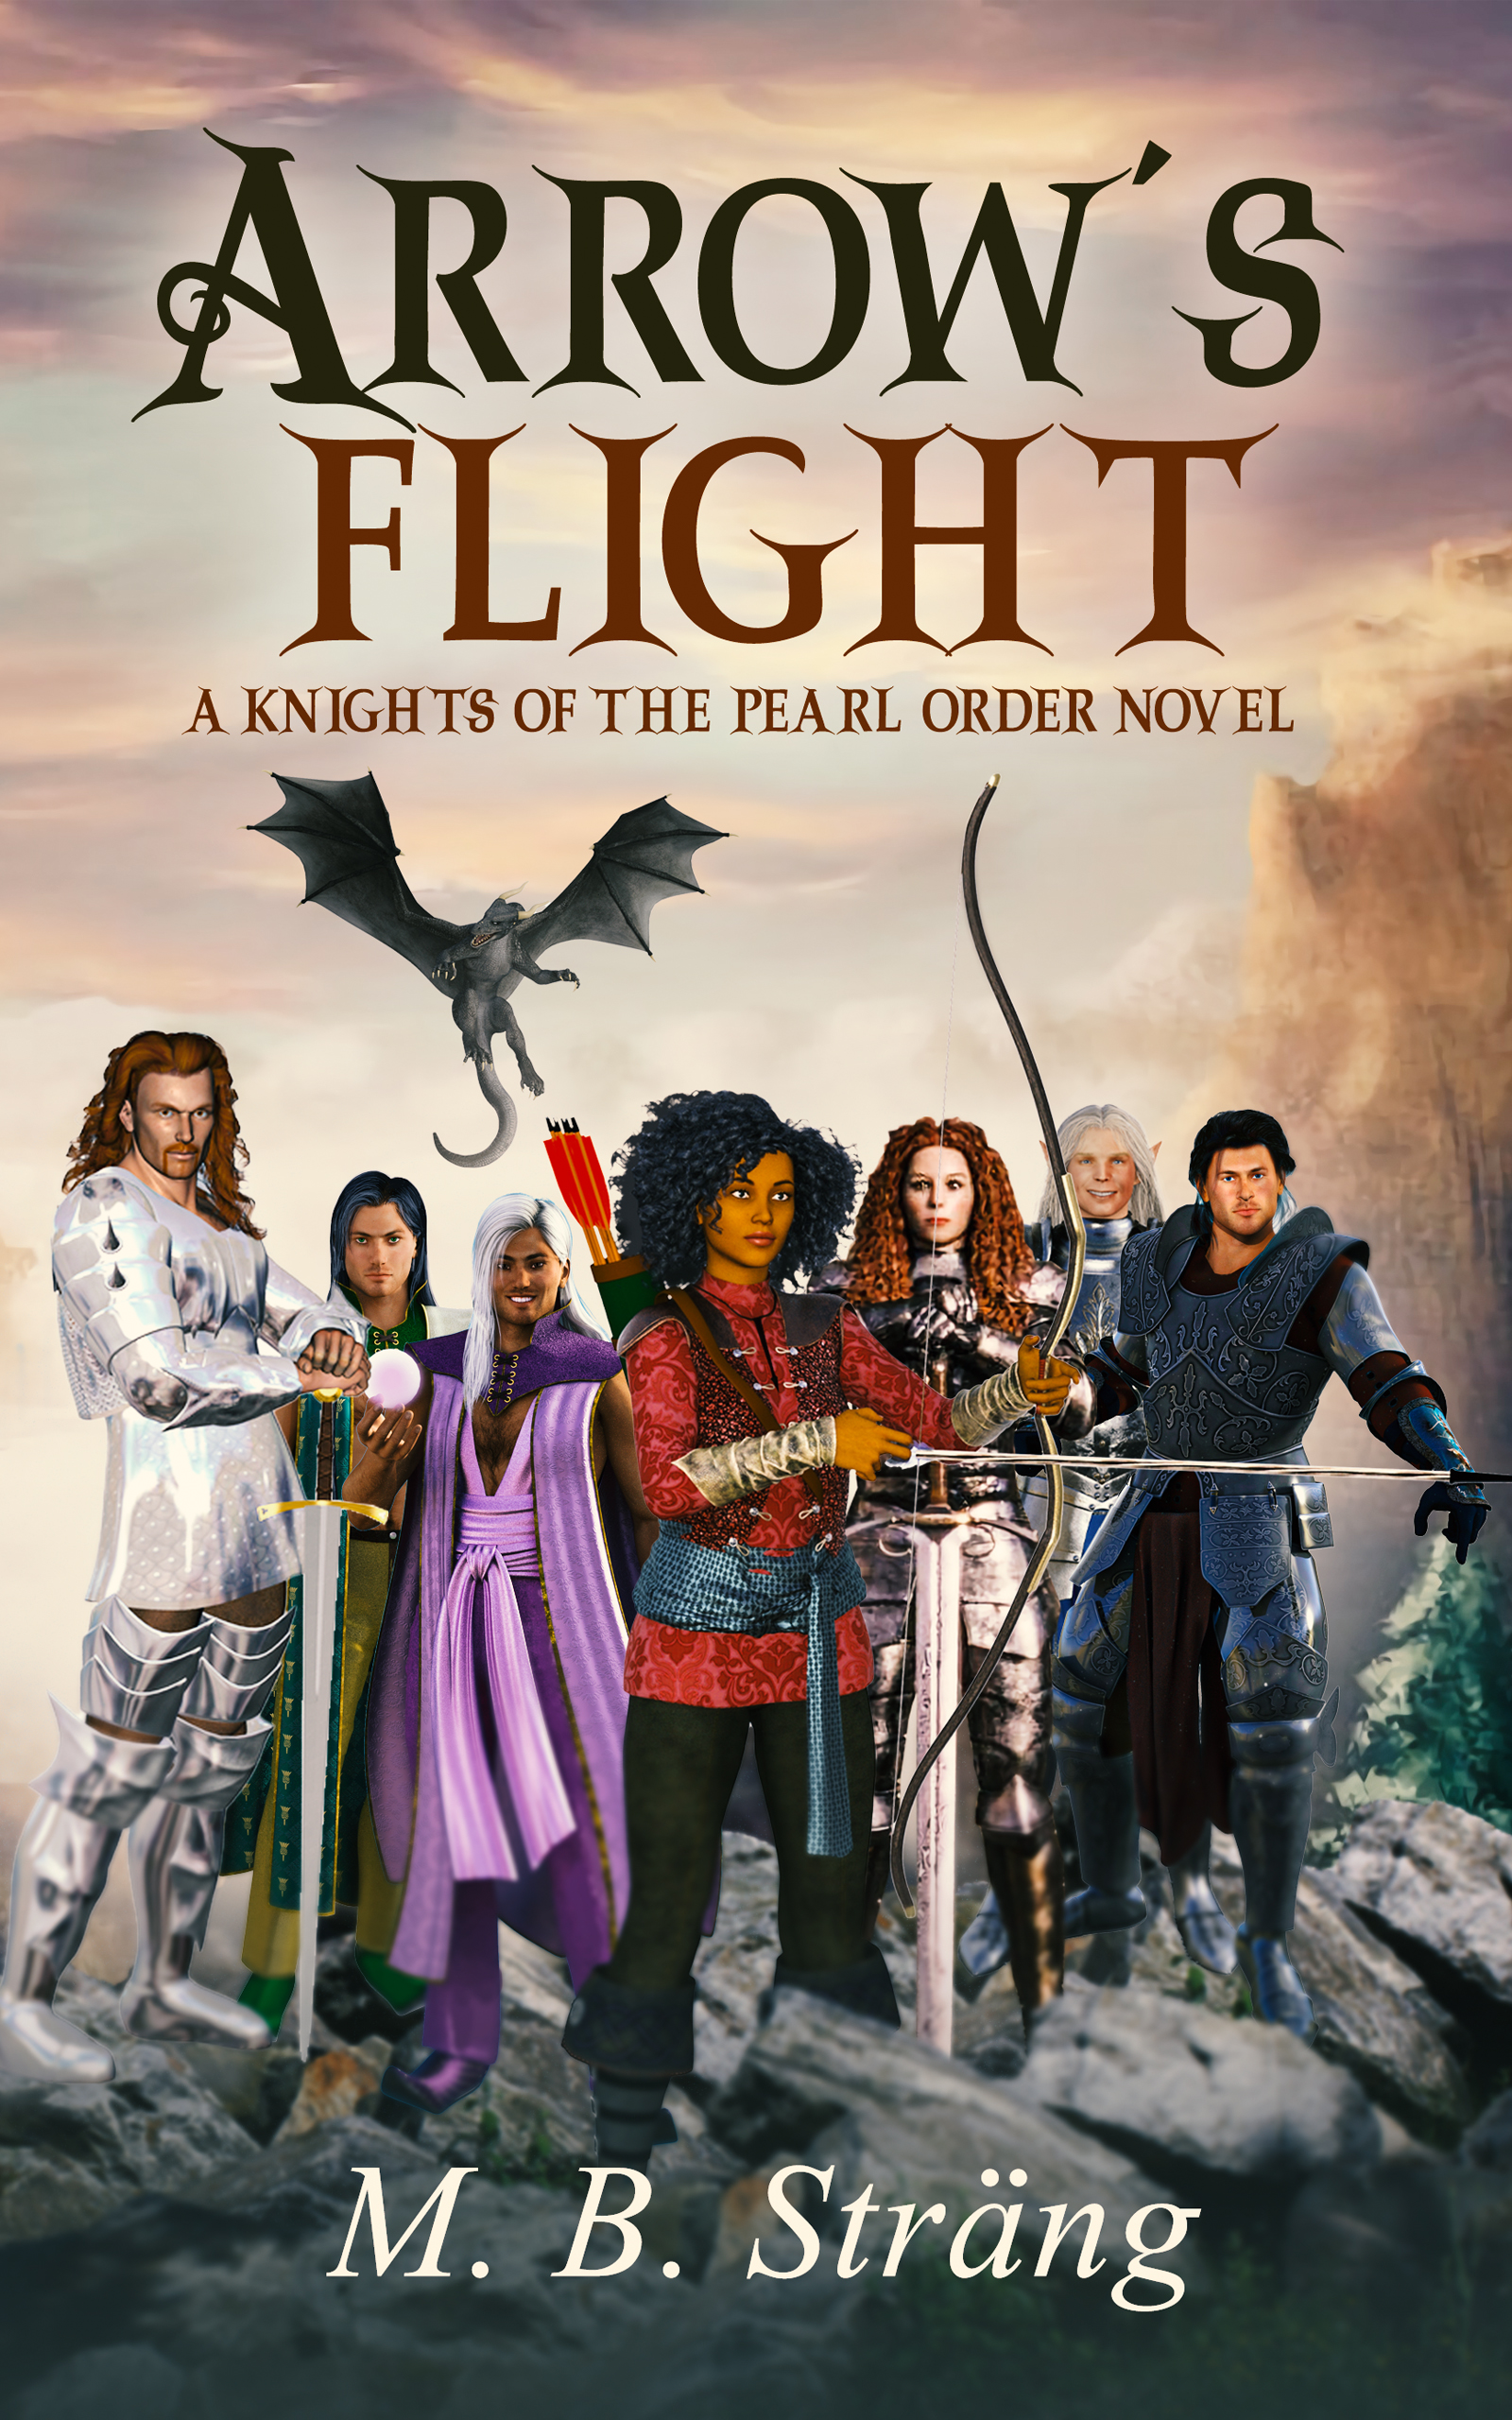 Cover for the book Arrow's Flight by M.B.Strang